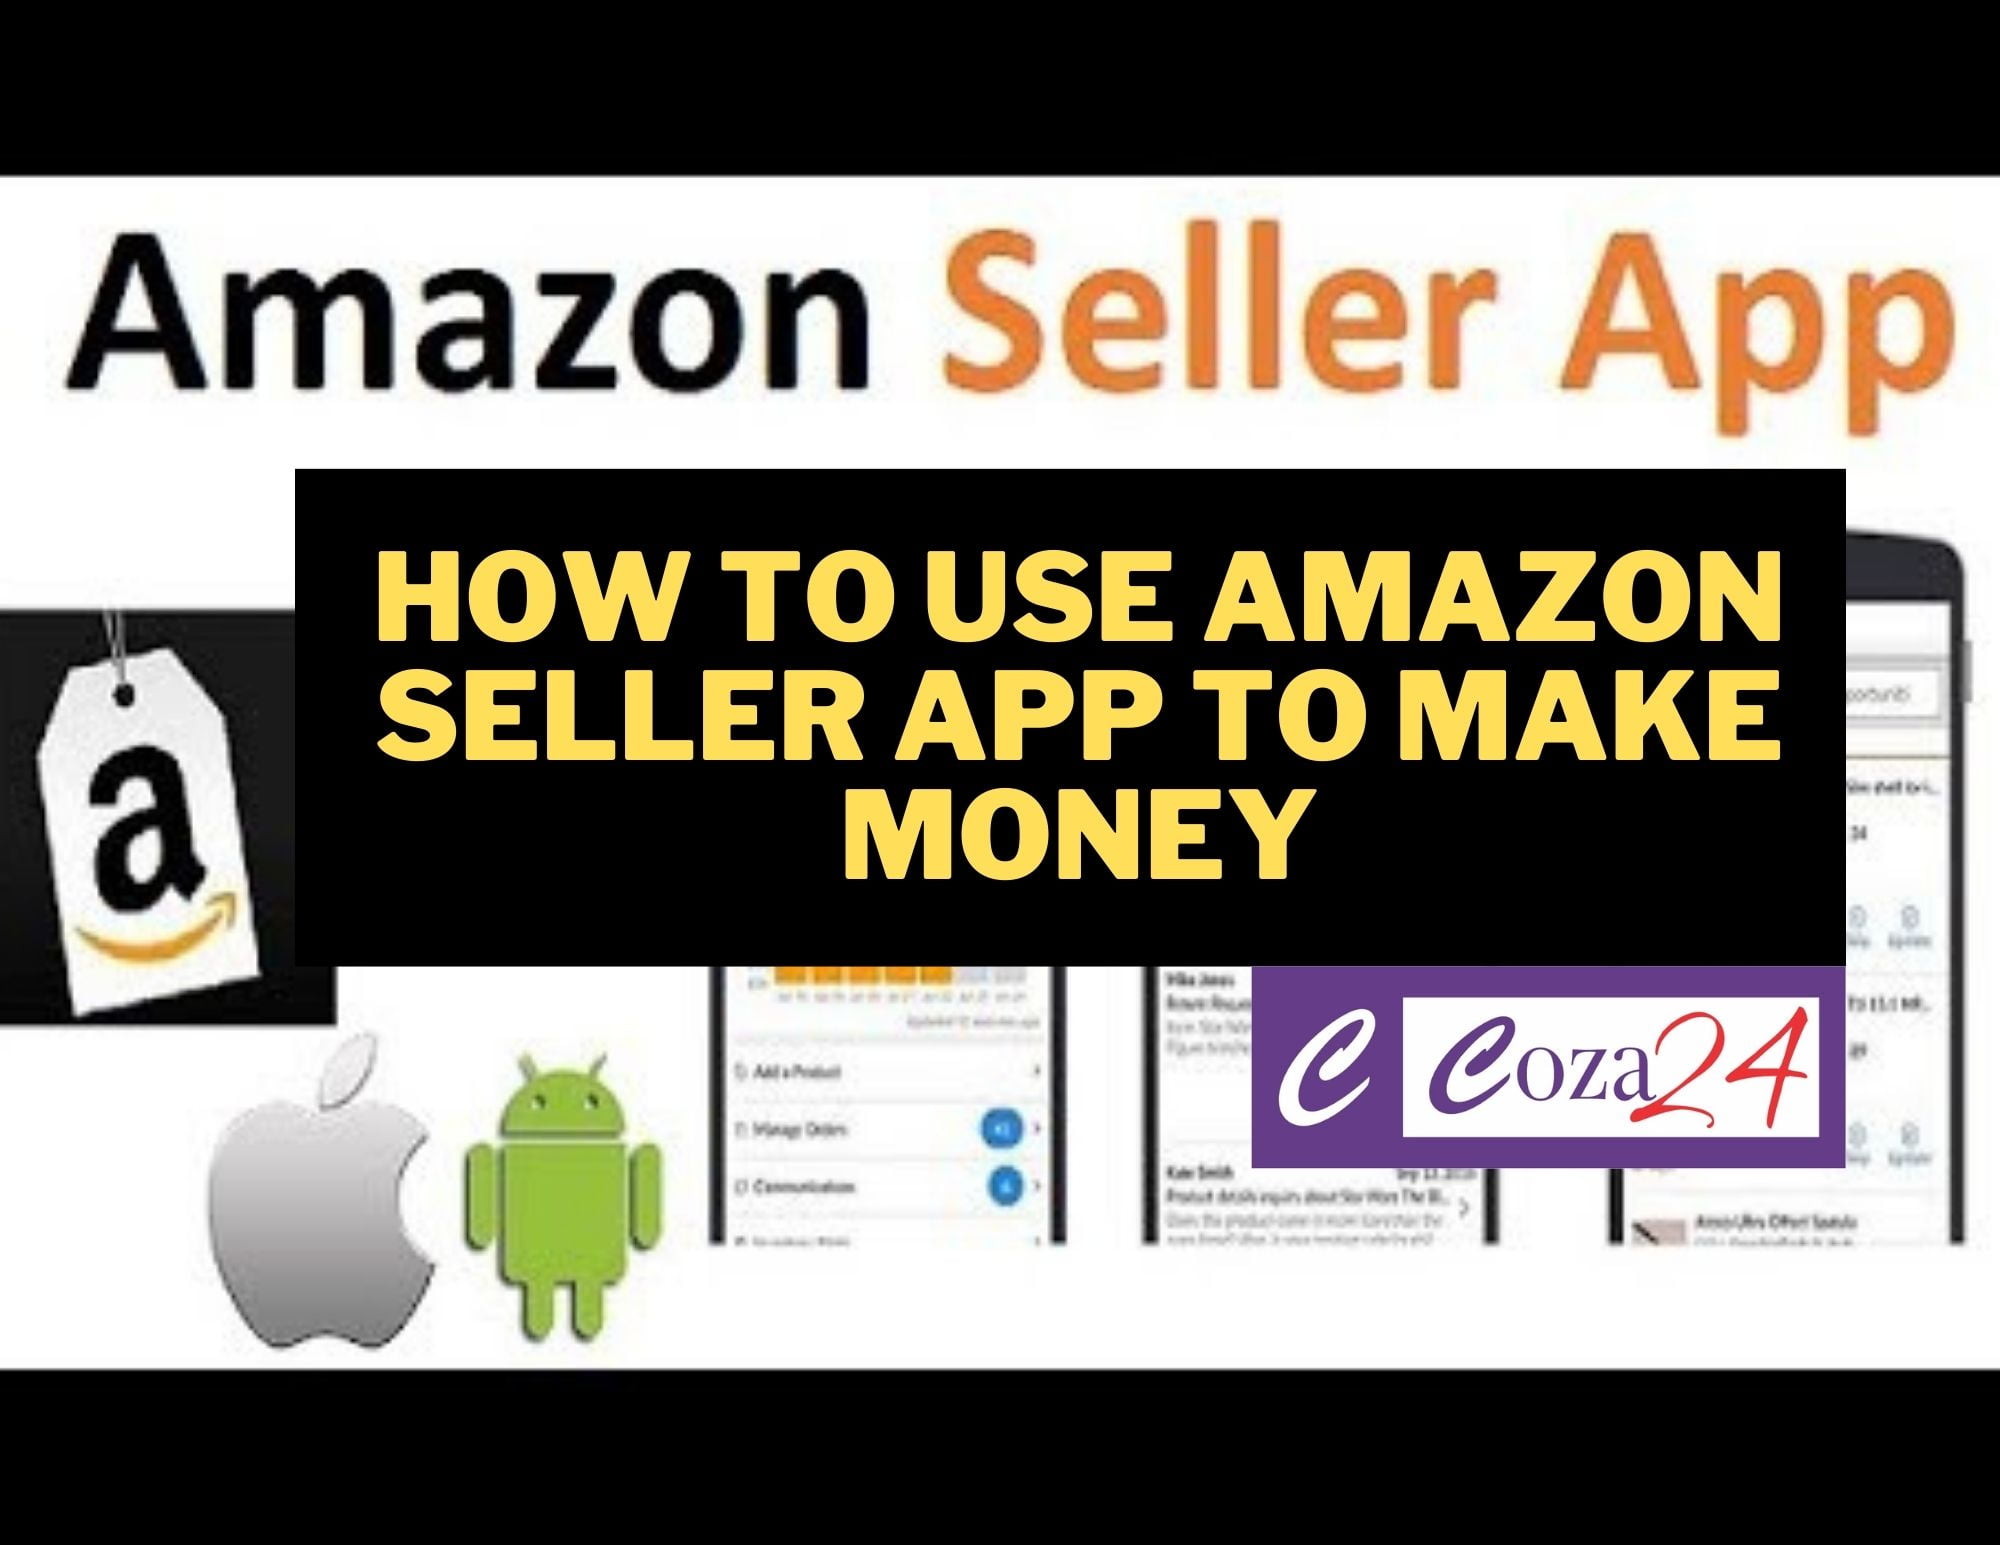 How To Use Amazon Seller App To Make Money